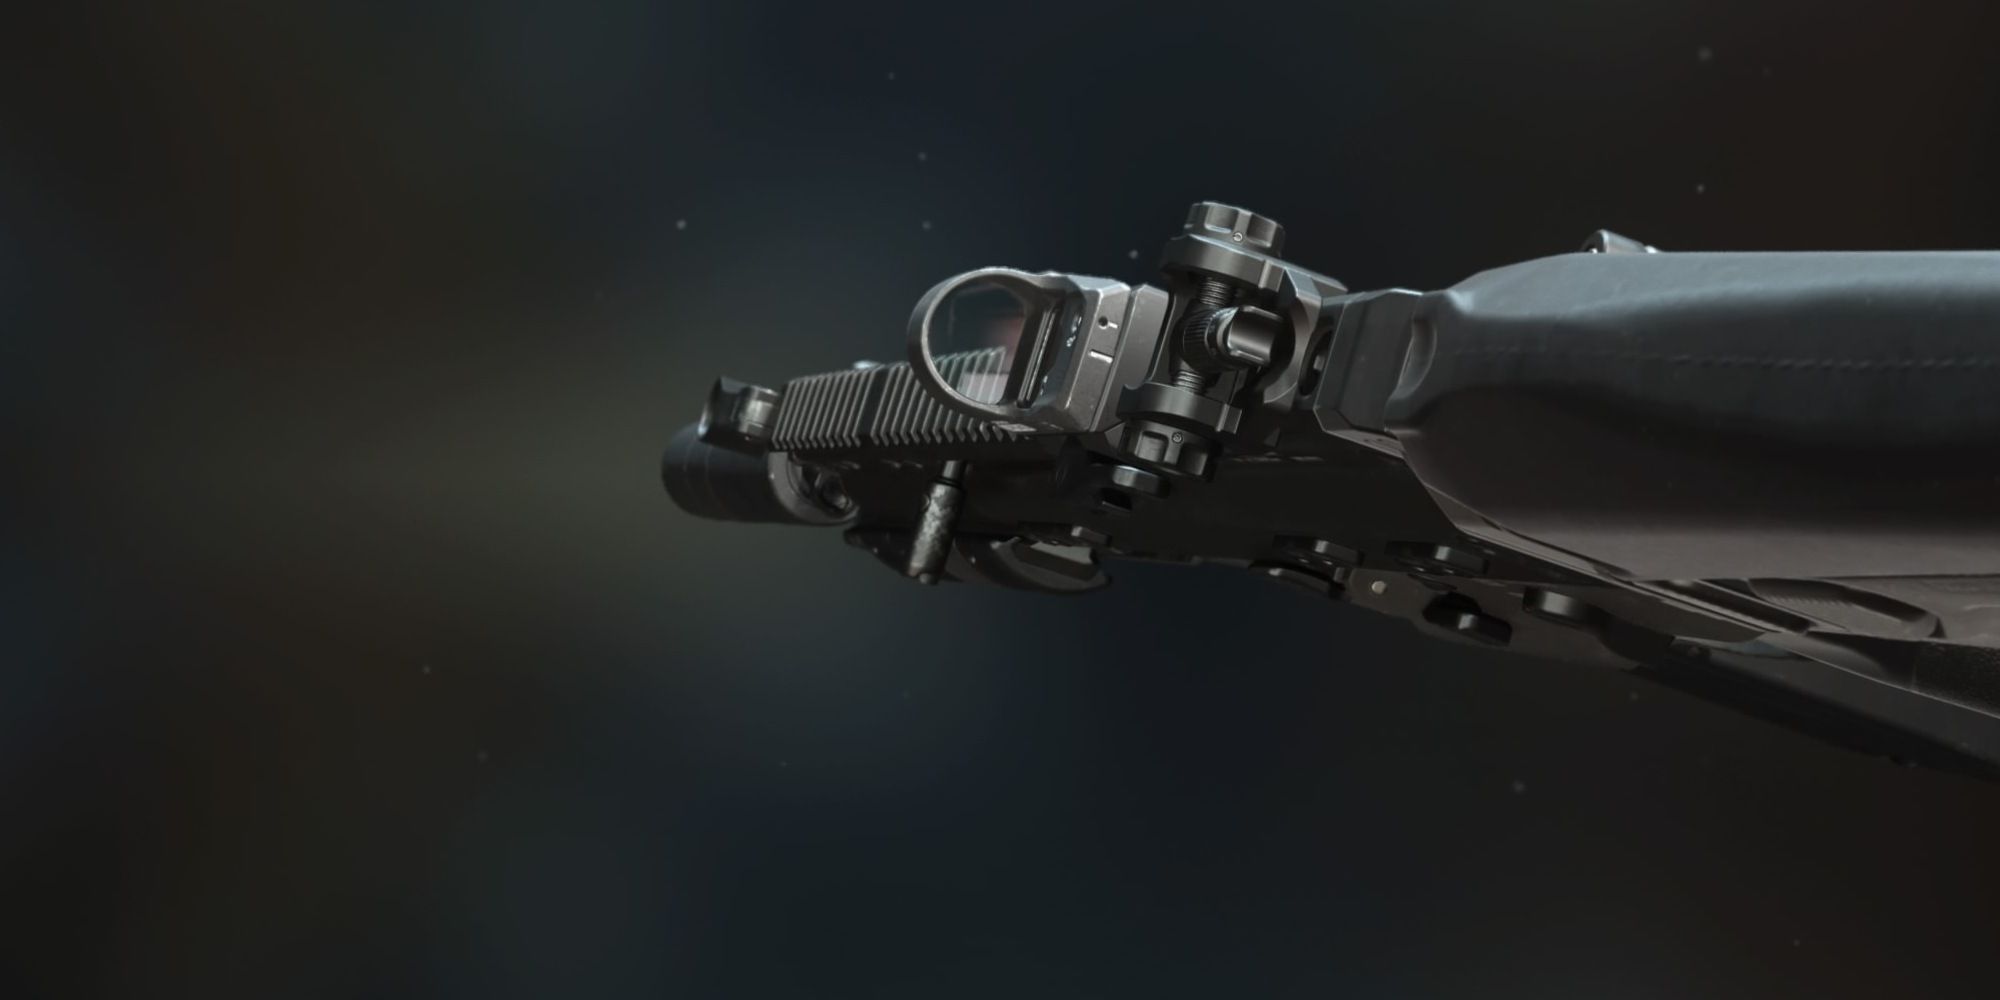 The Cronen Mini Red Dot is on top of the TAQ-56 assault rifle from COD:MW2.